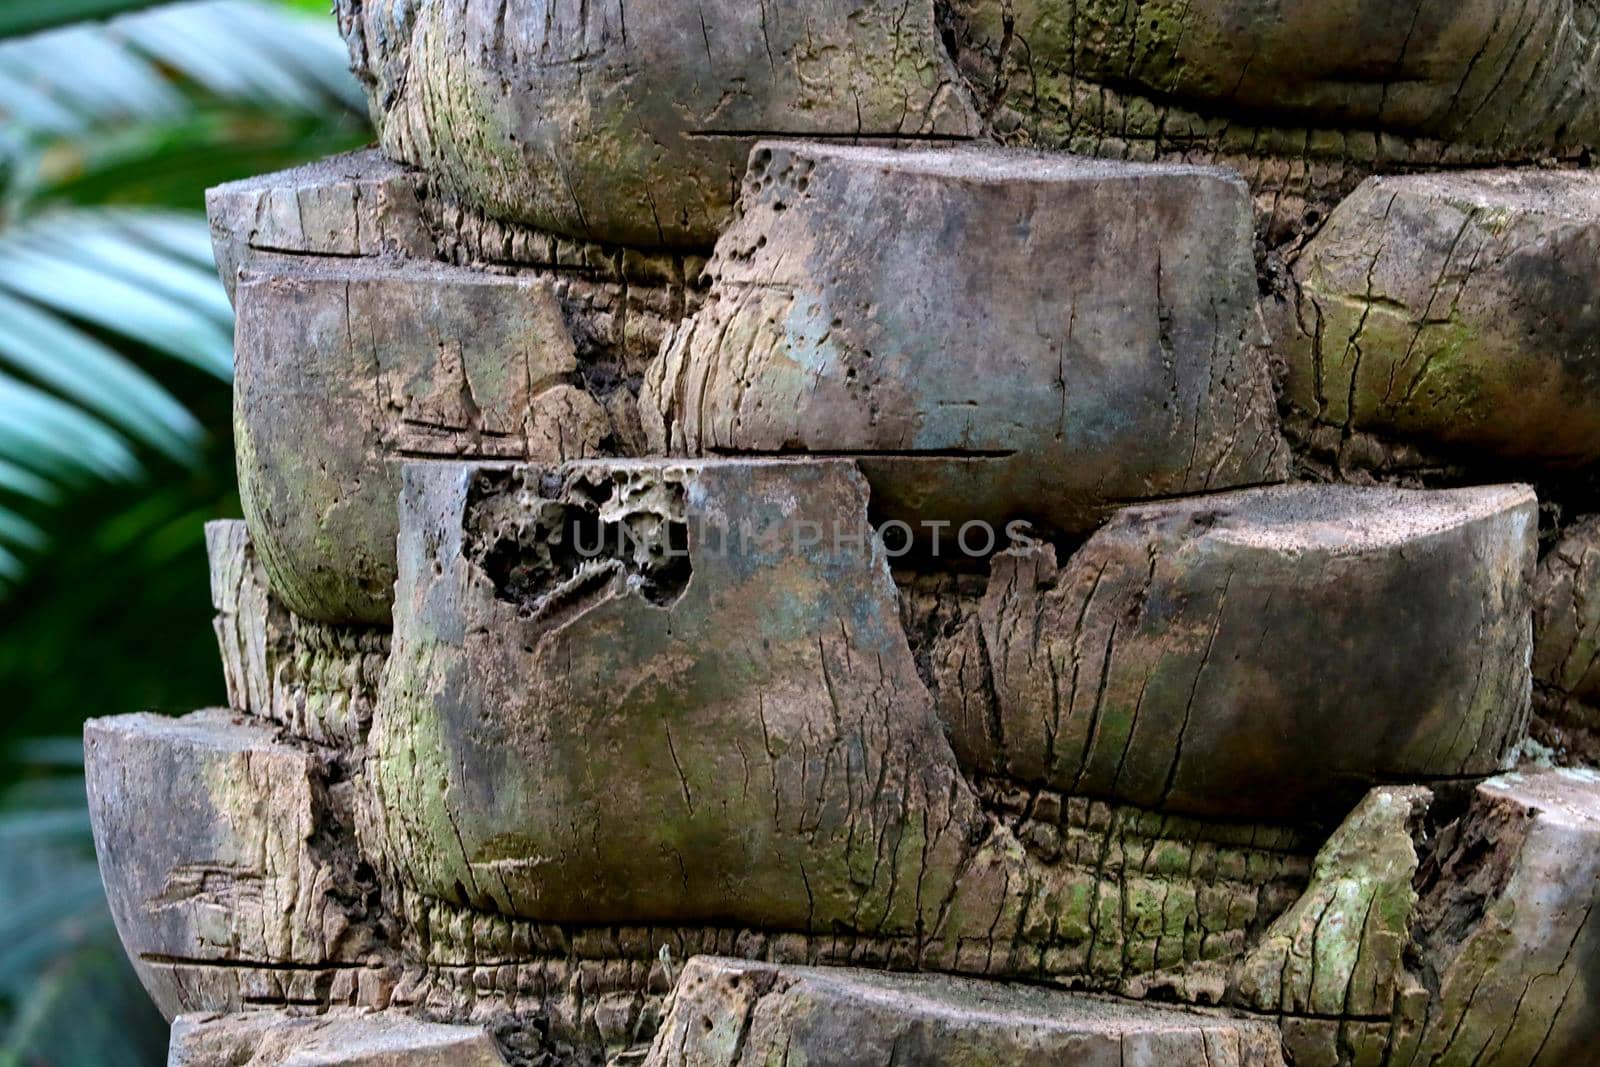 View of the trunk of an old coconut tree, background